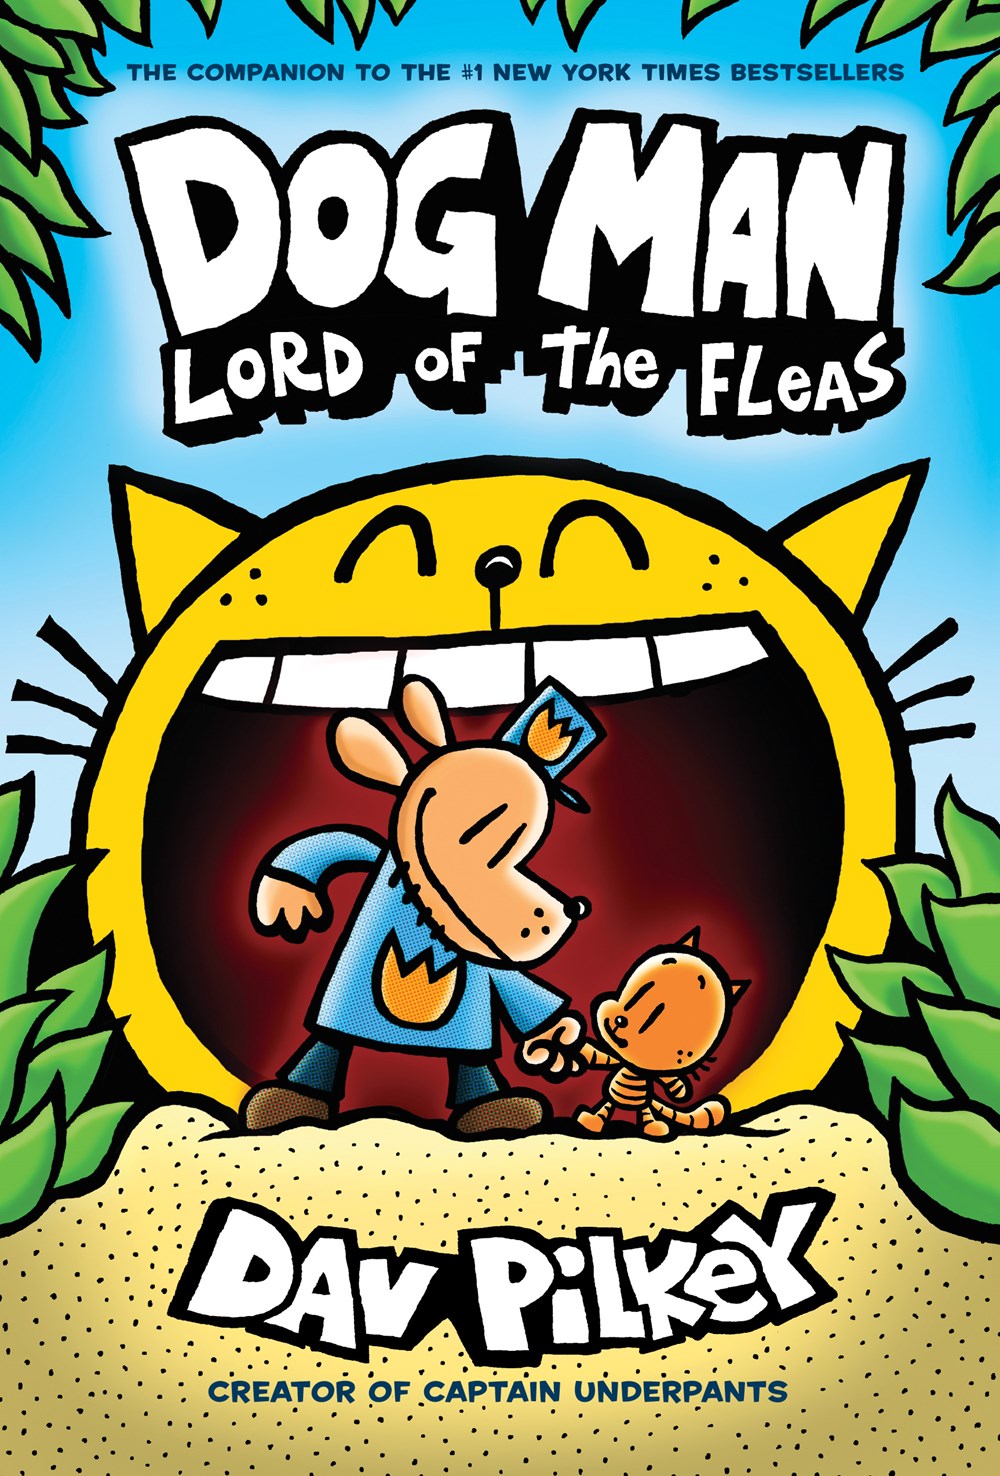  Dog Man: Lord of the Fleas